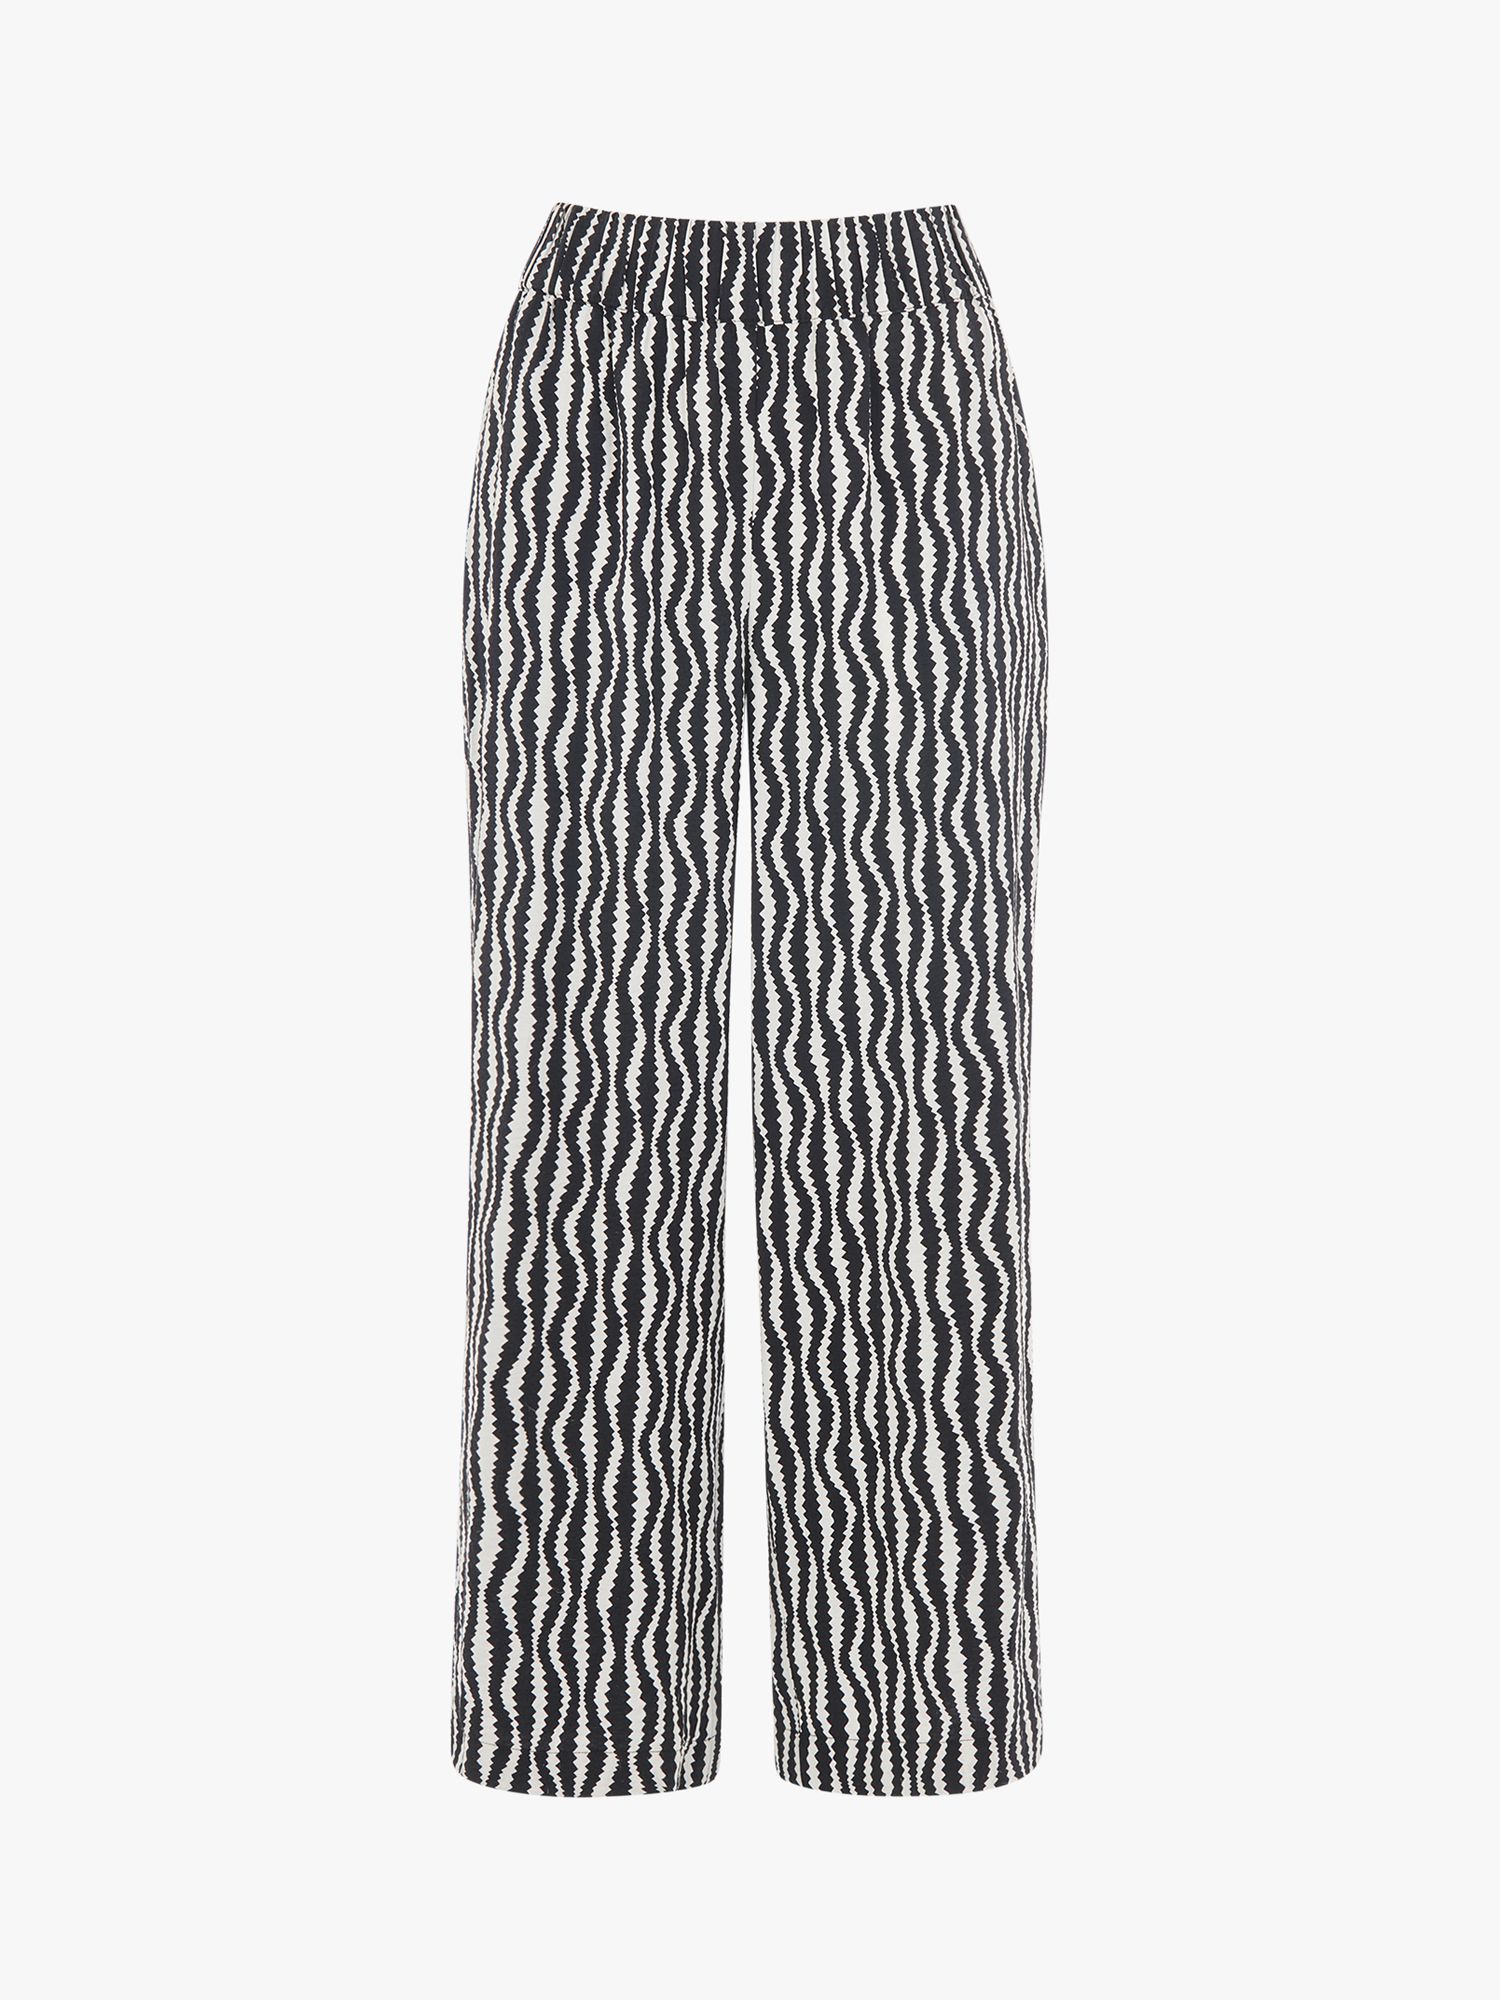 Whistles Optical Rope Cropped Trousers, Black/White at John Lewis & Partners